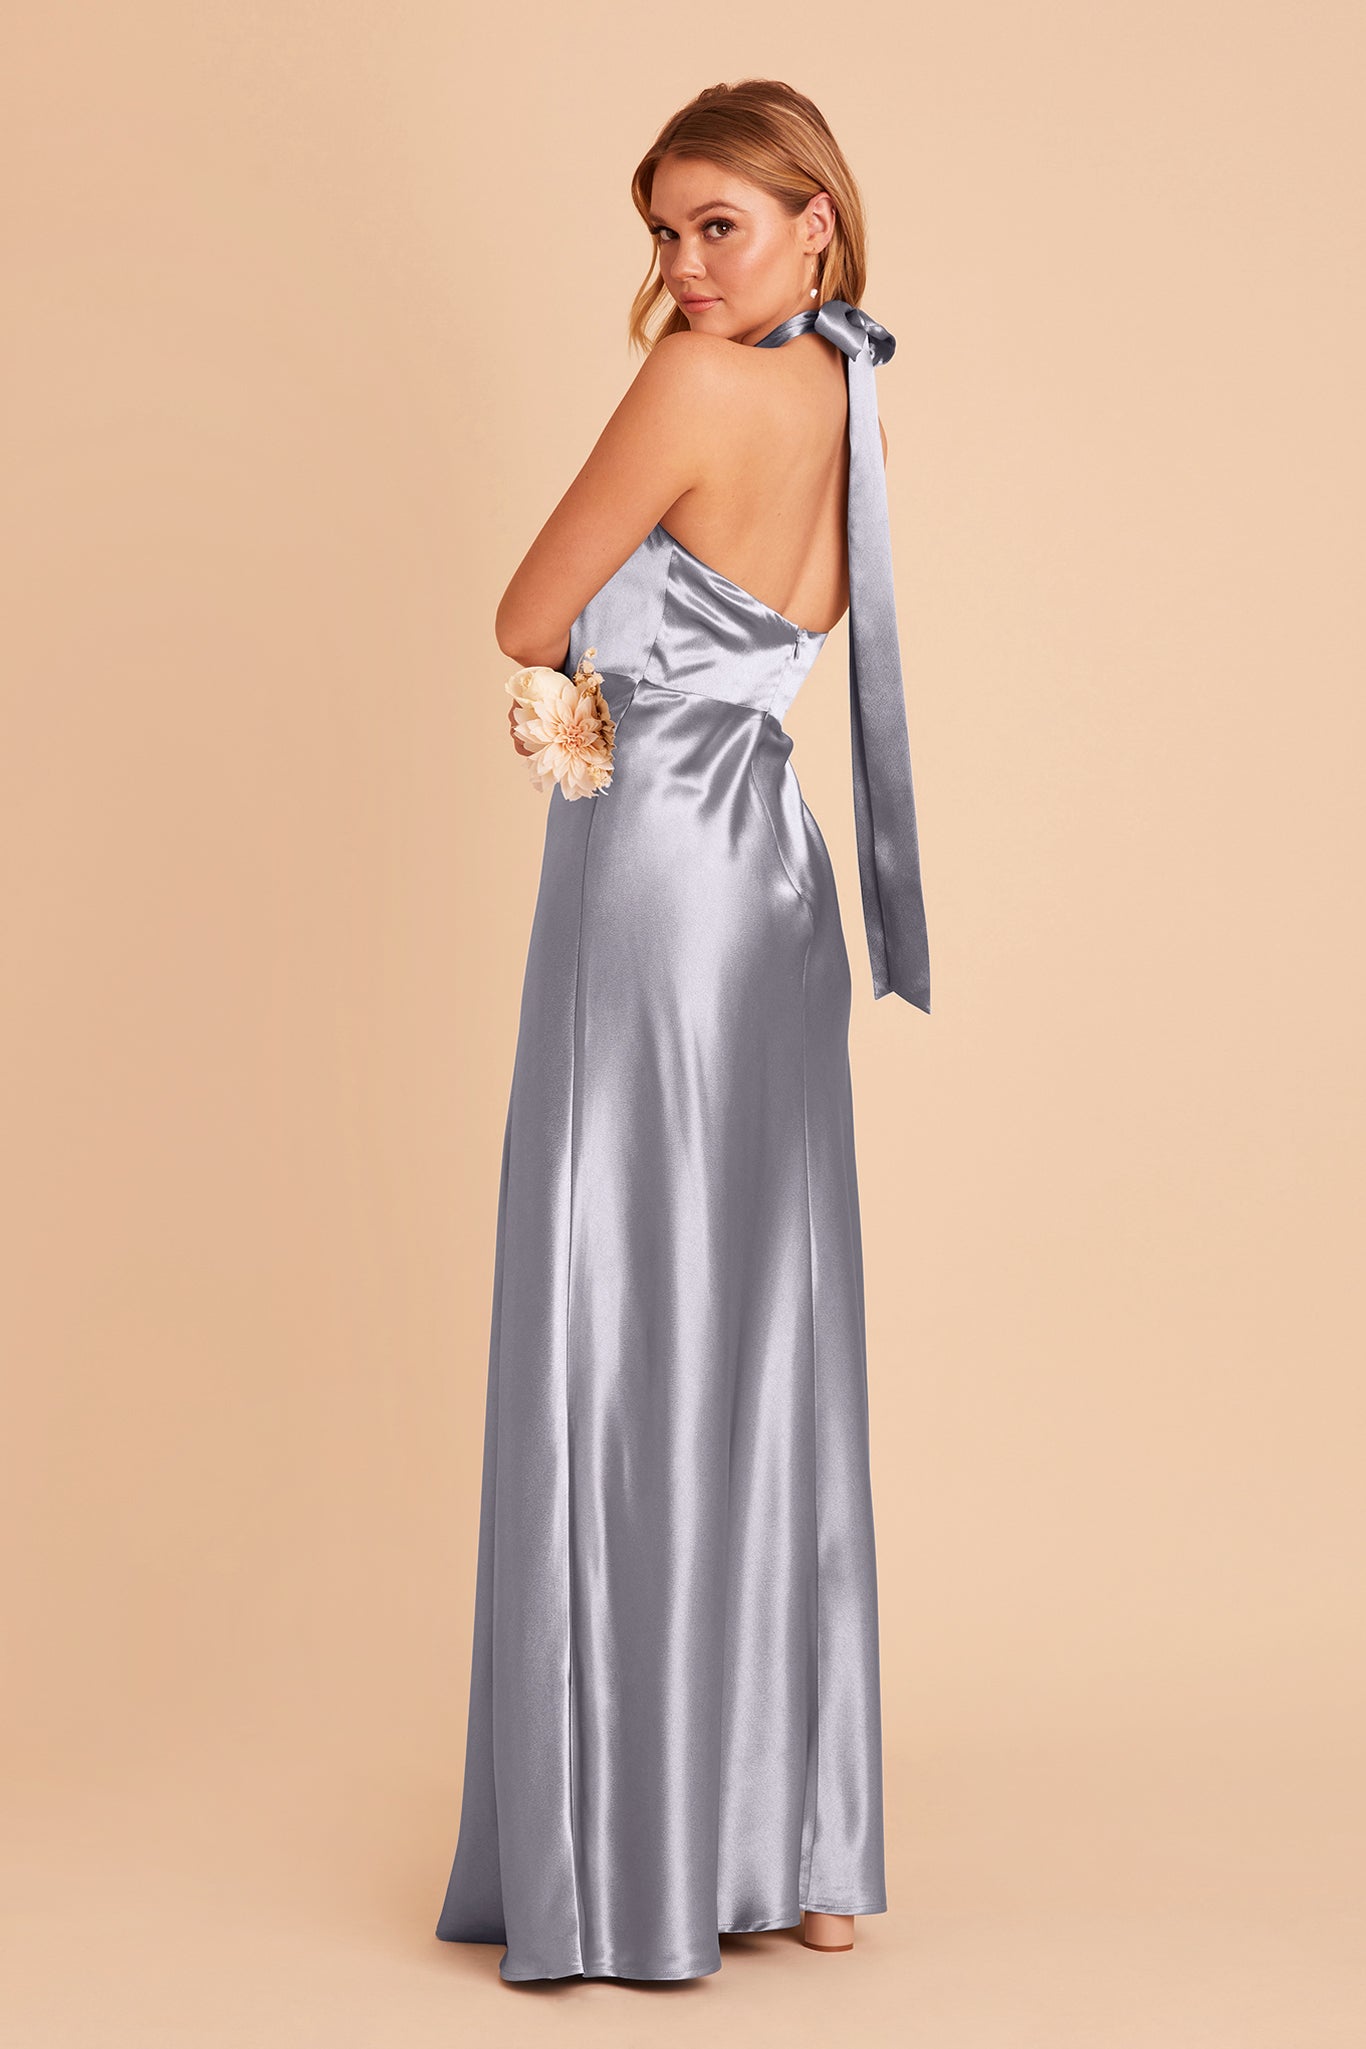 Monica bridesmaid dress with slit in dusty blue satin by Birdy Grey, side view